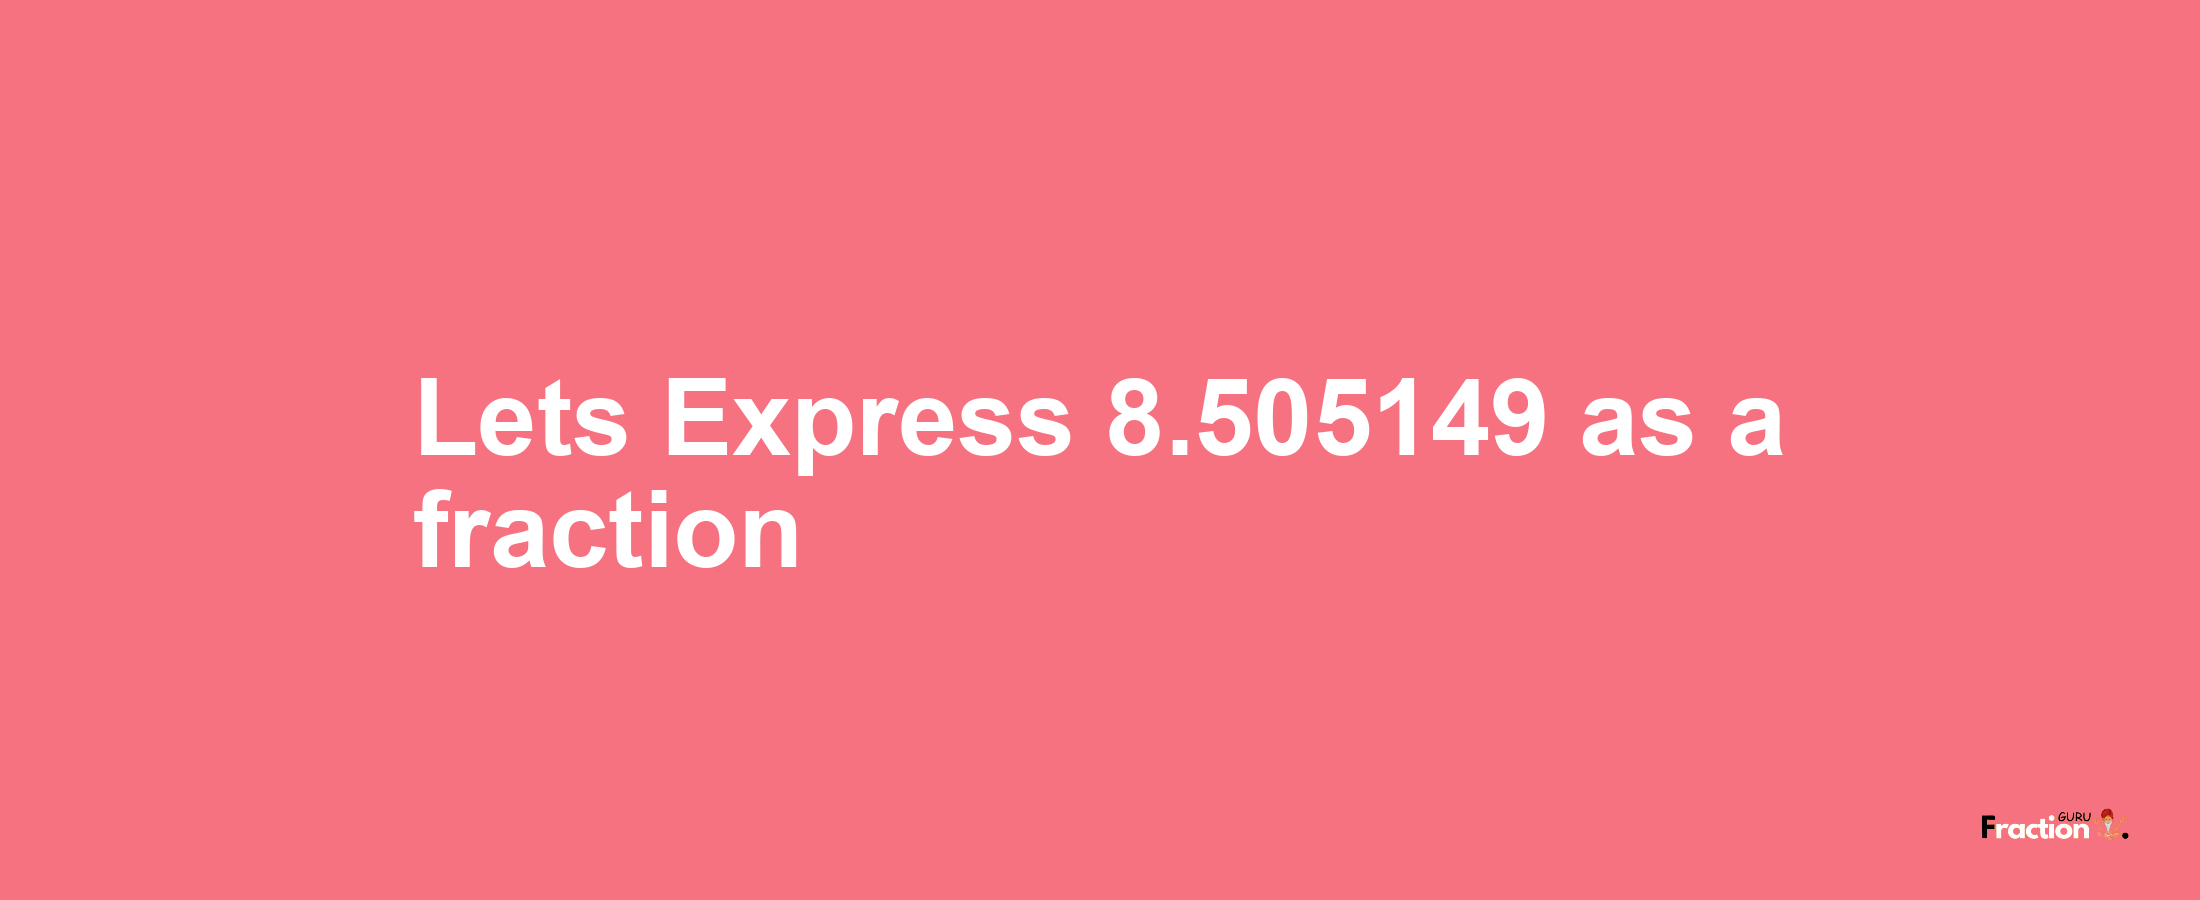 Lets Express 8.505149 as afraction